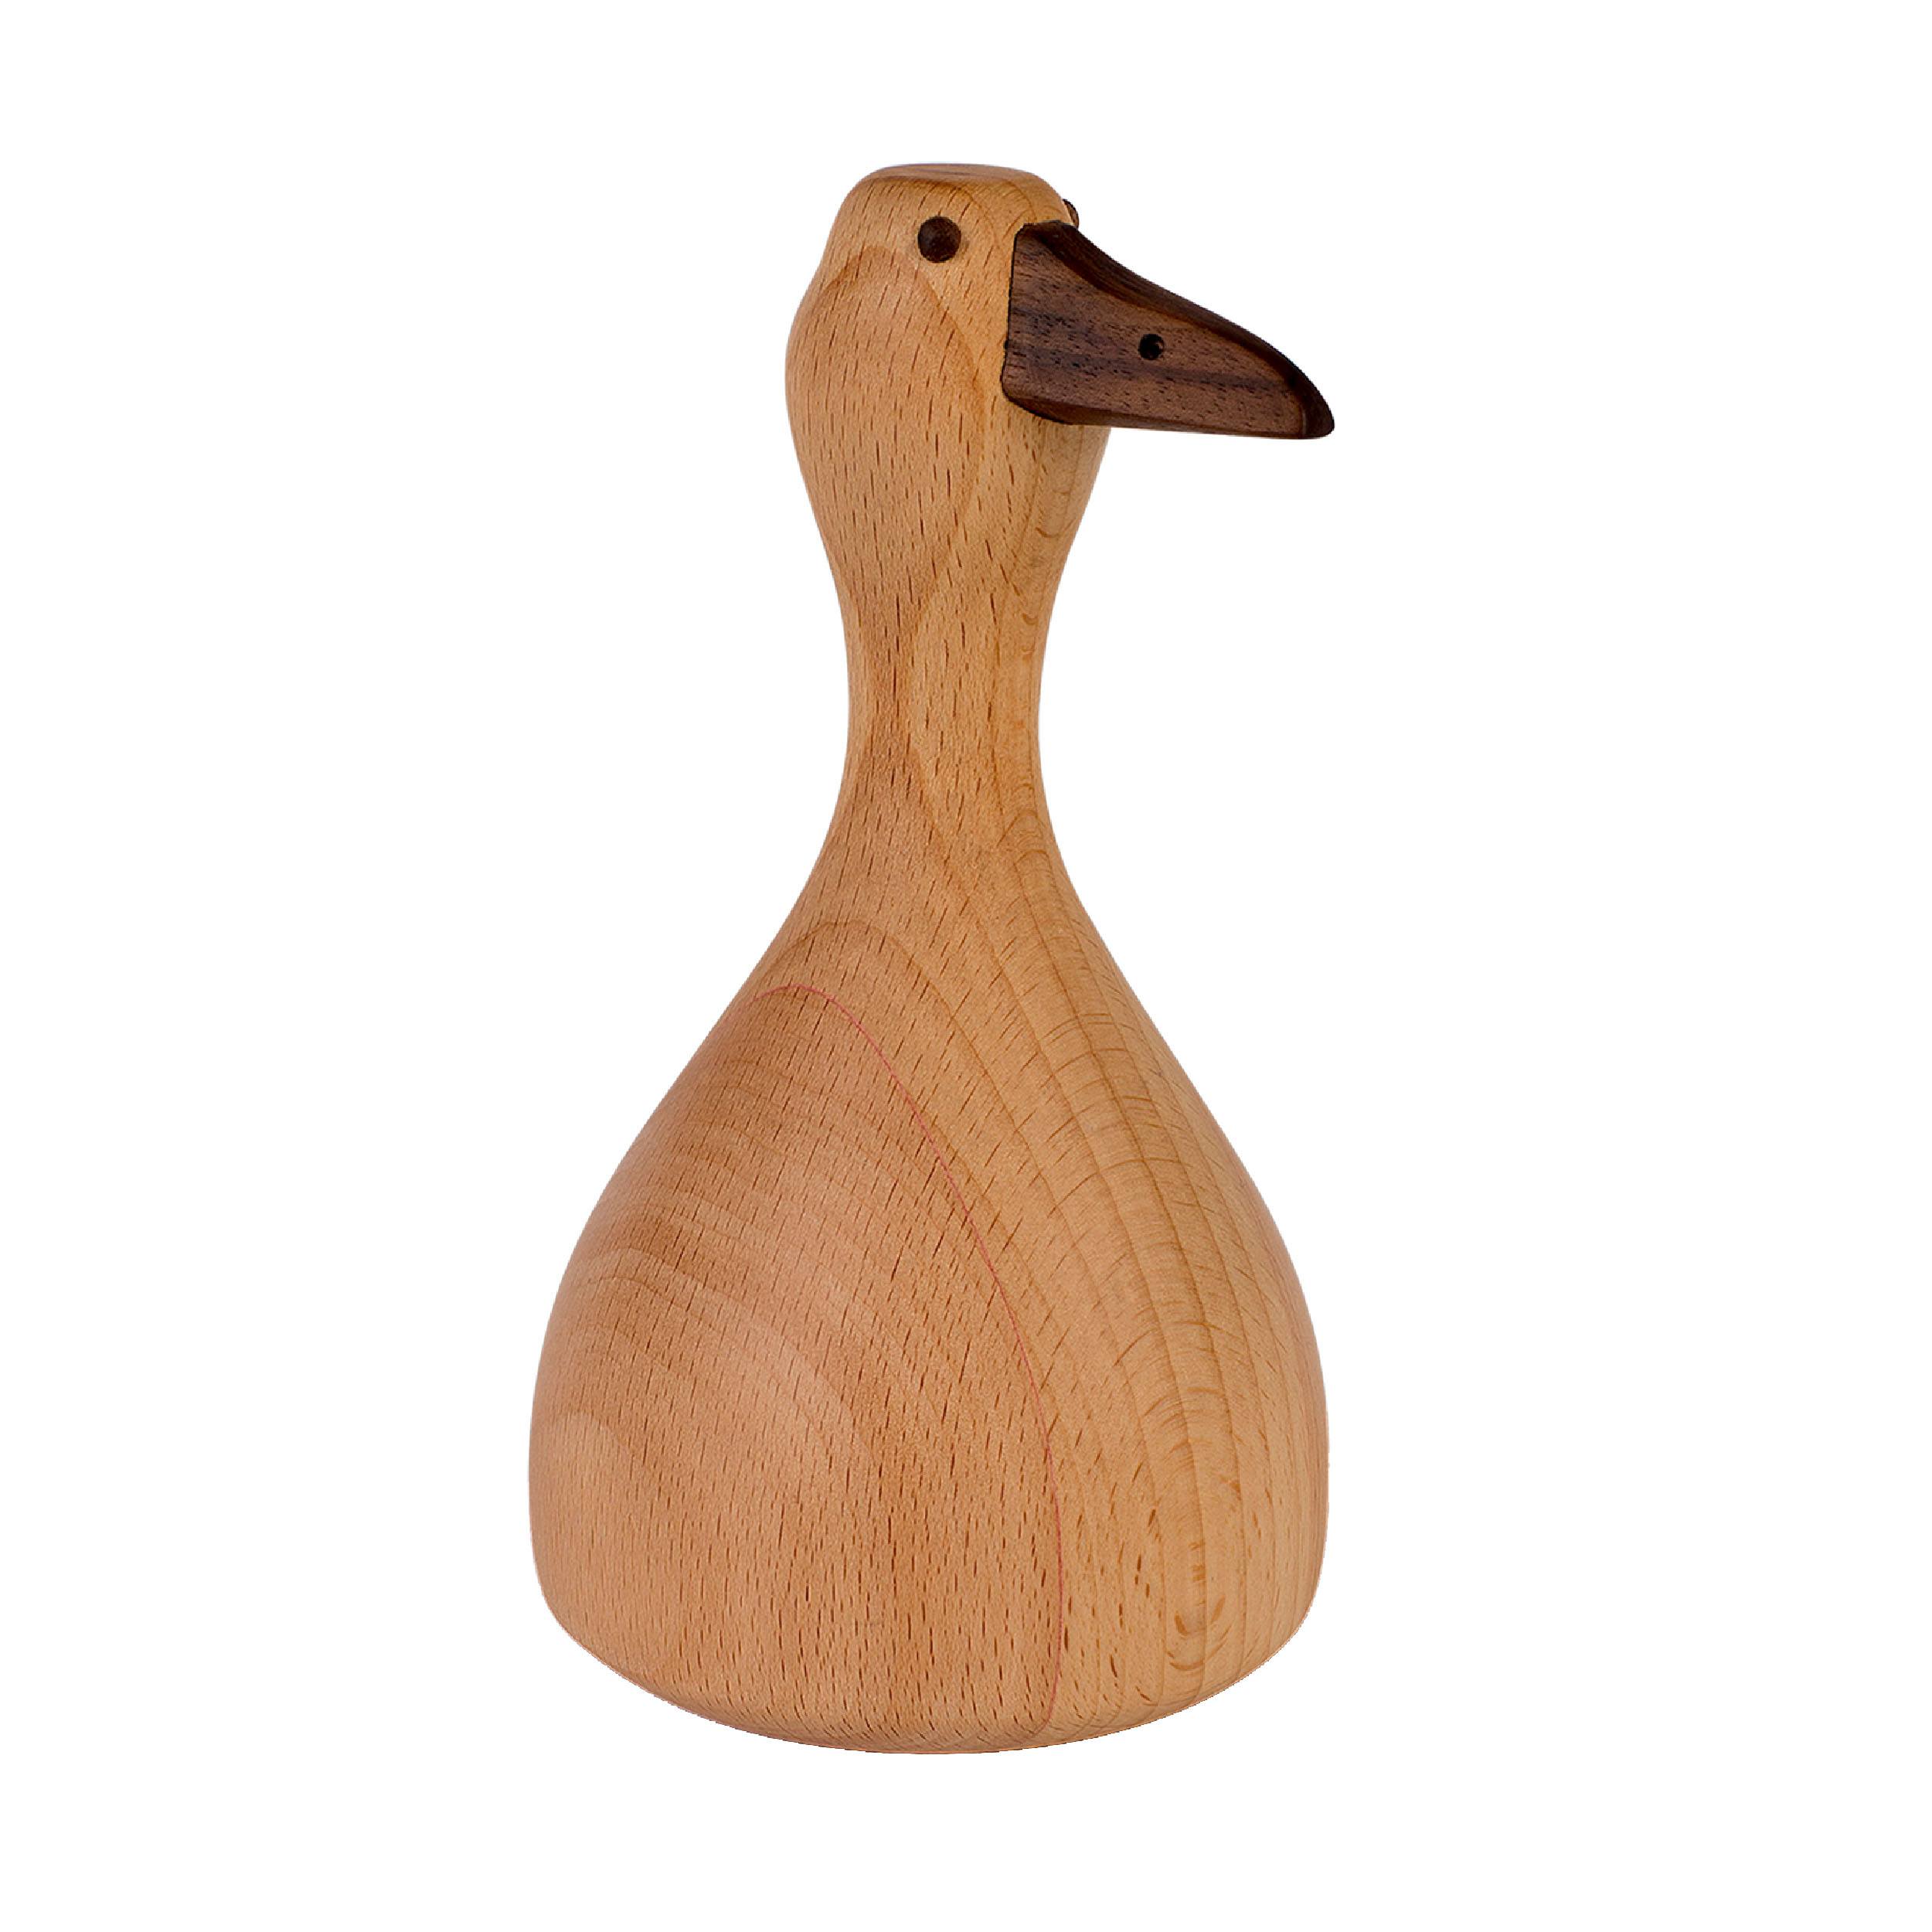 The Goose Holzfigur